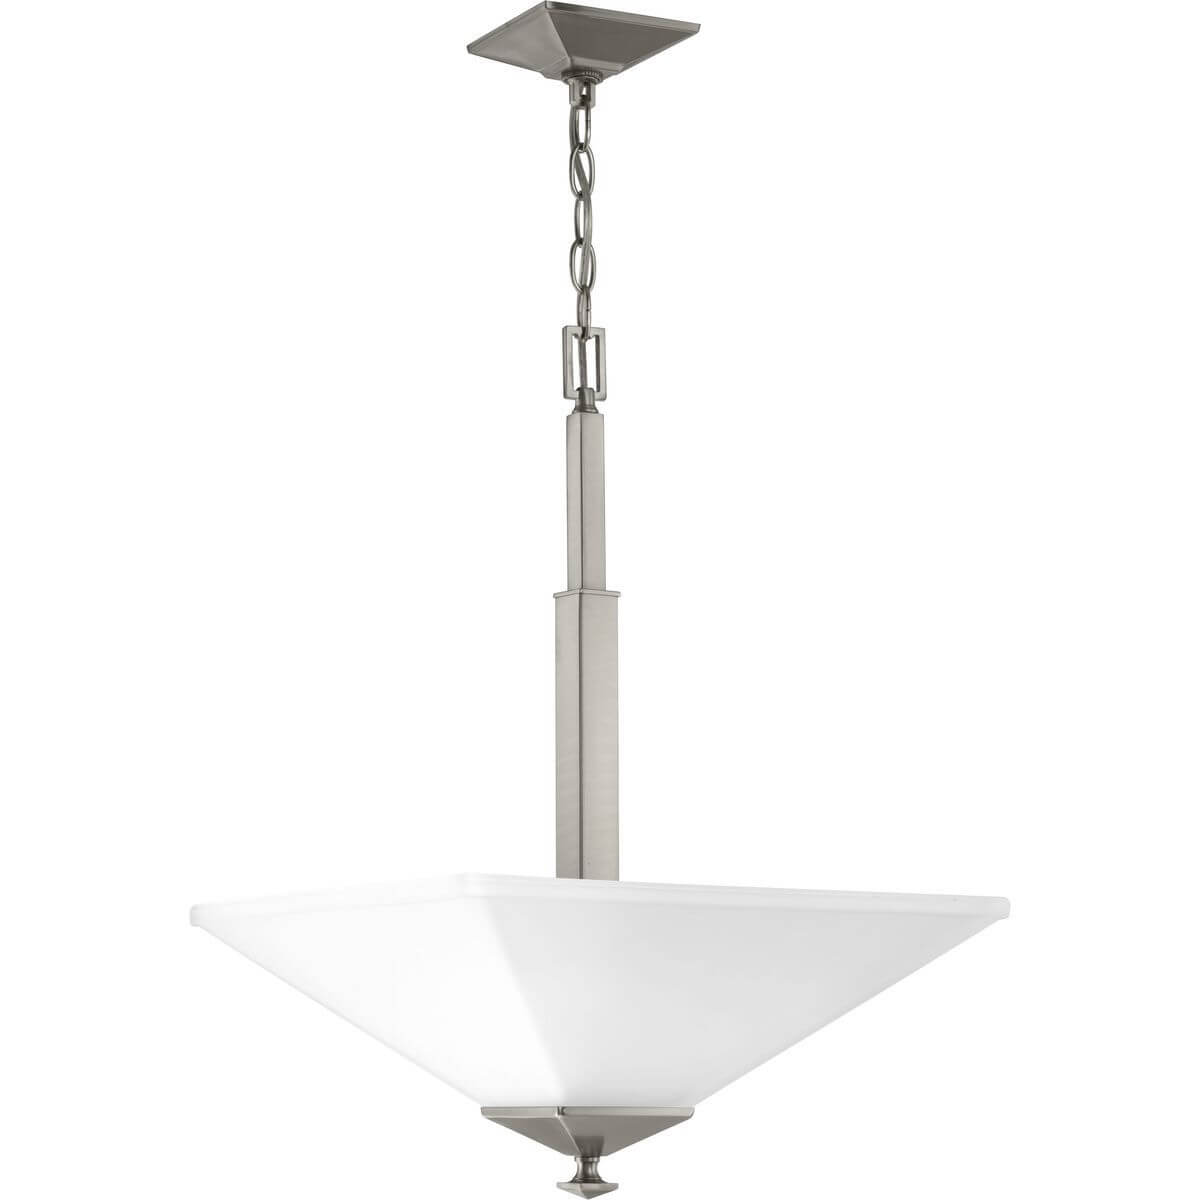 Progress Lighting Clifton Heights 2 Light 16 inch Inverted Pendant in Brushed Nickel with Etched Glass P500126-009